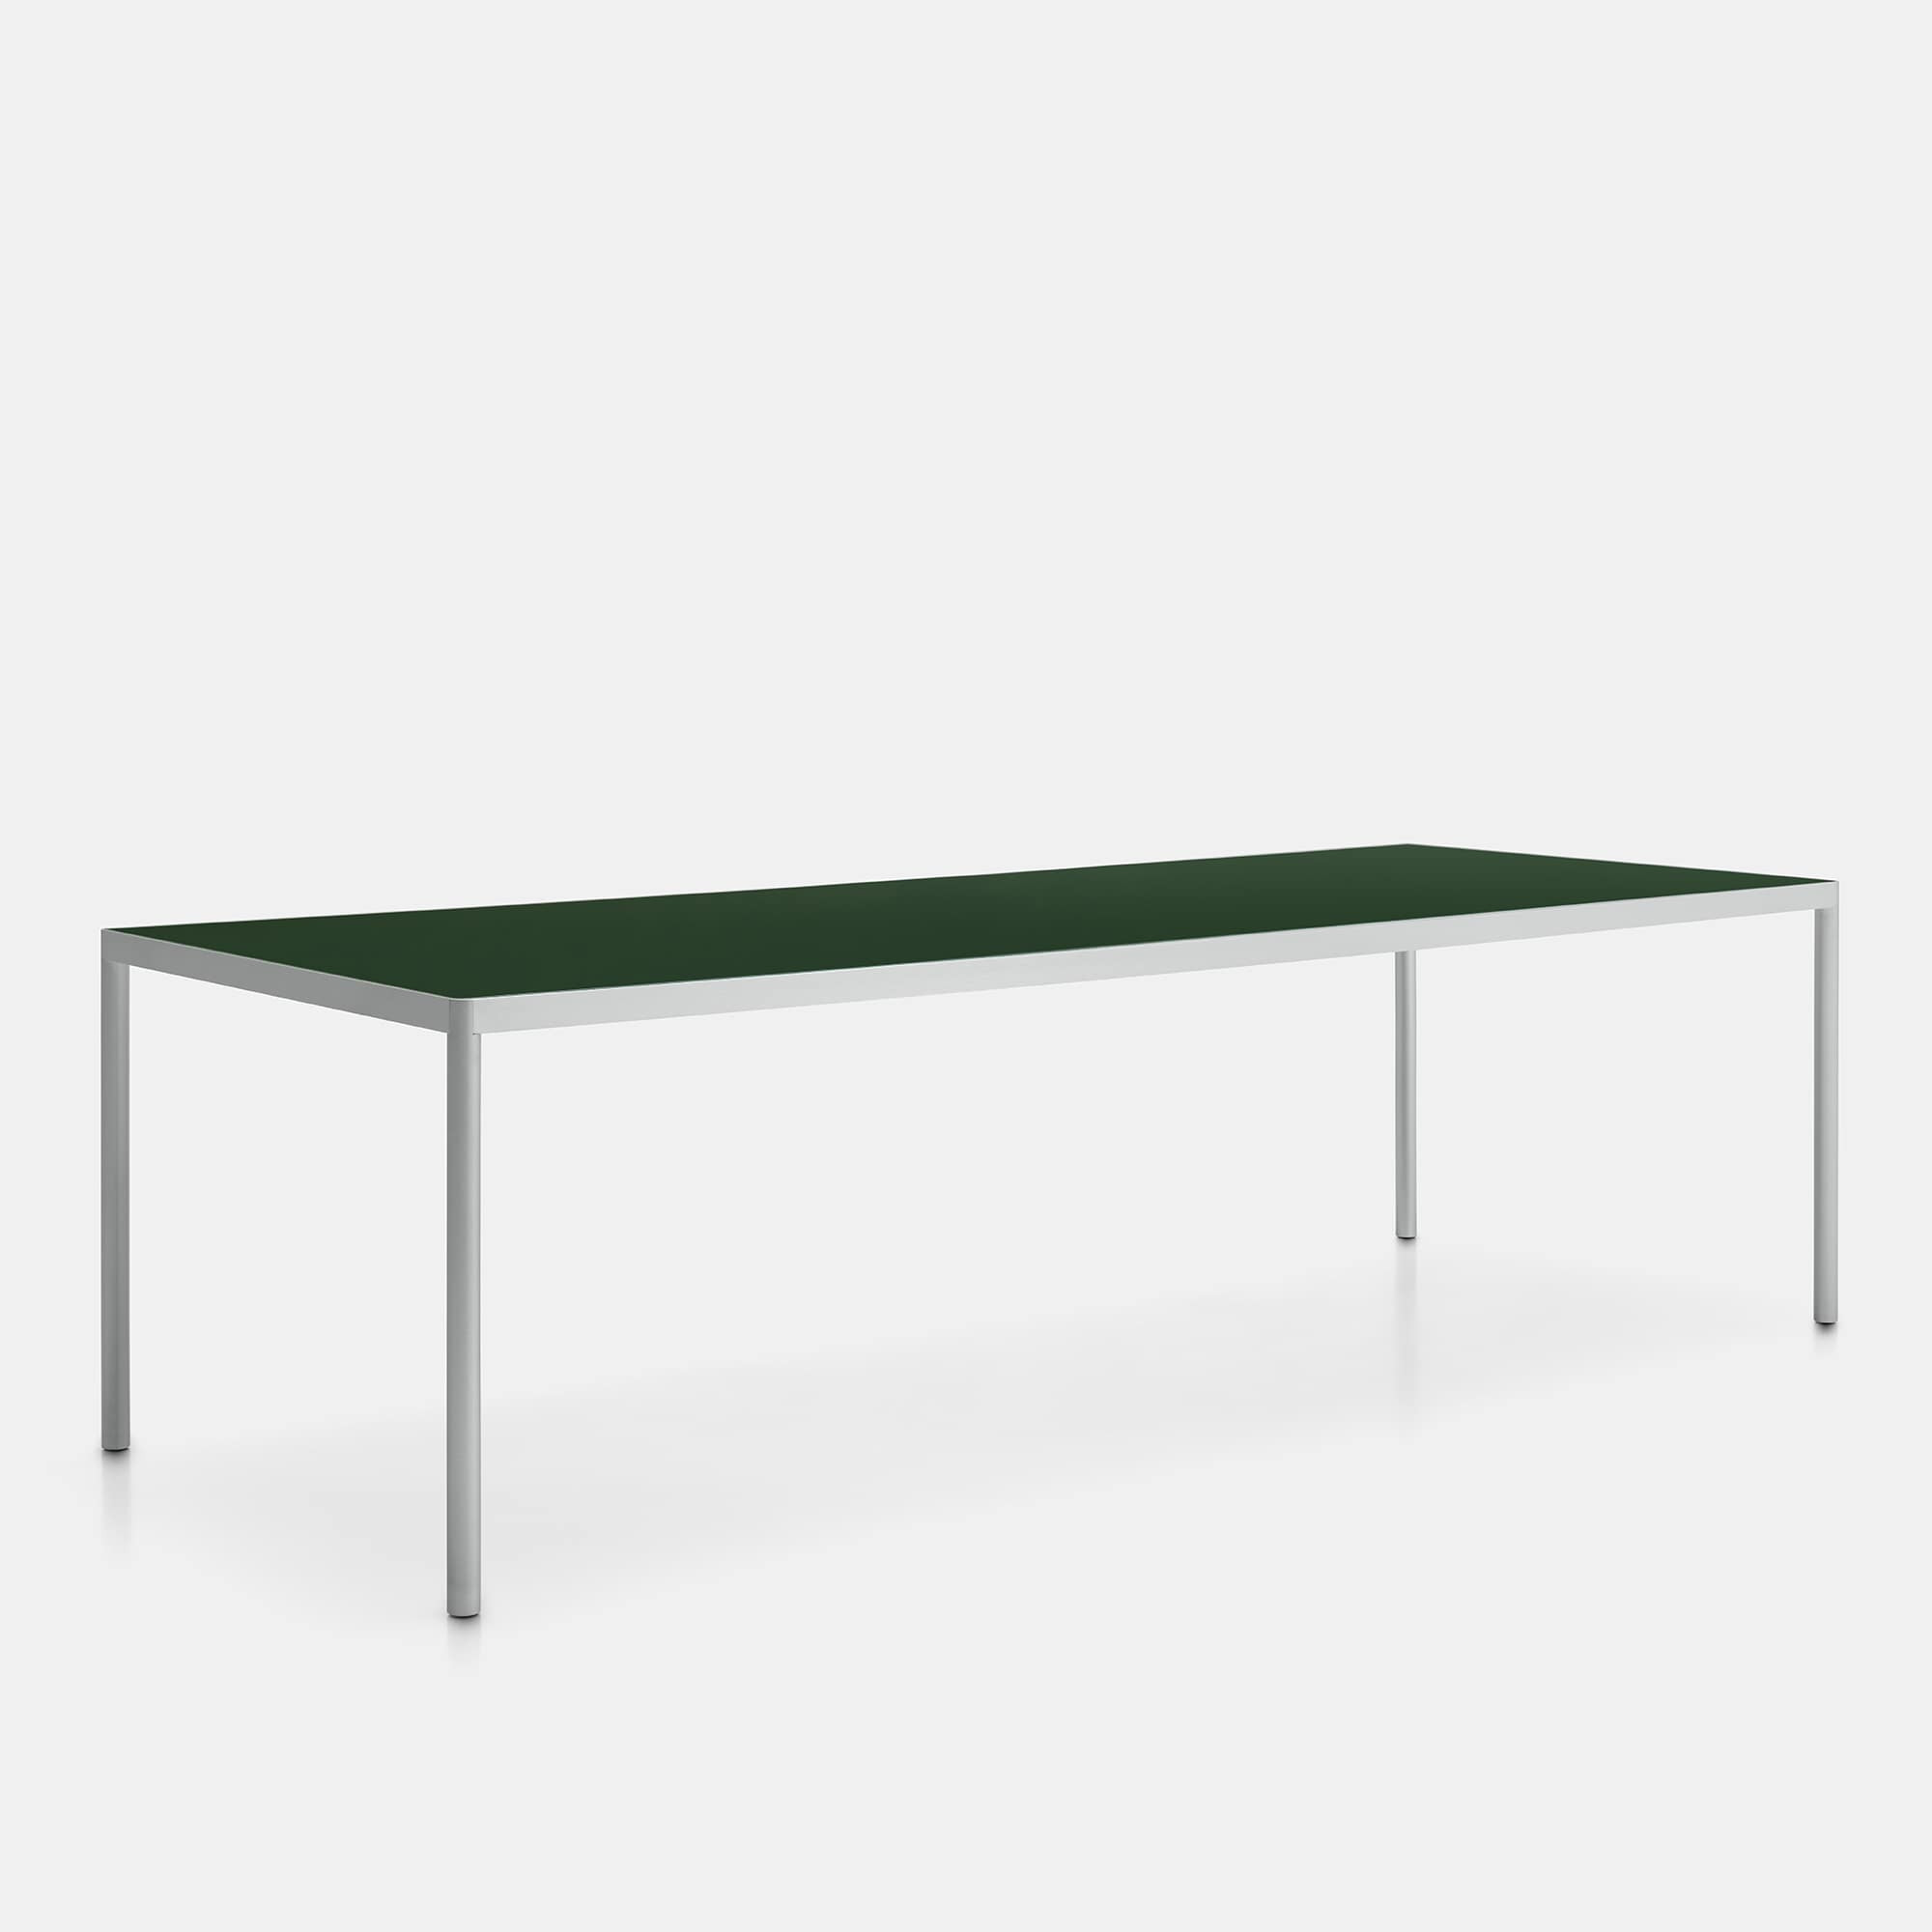 Offset Indoor / Outdoor Table ☞ Use: Outdoor ☞ Structure: Brushed Anodised Aluminium X137 ☞ Top: Reconstructed Stone Sage Green X161